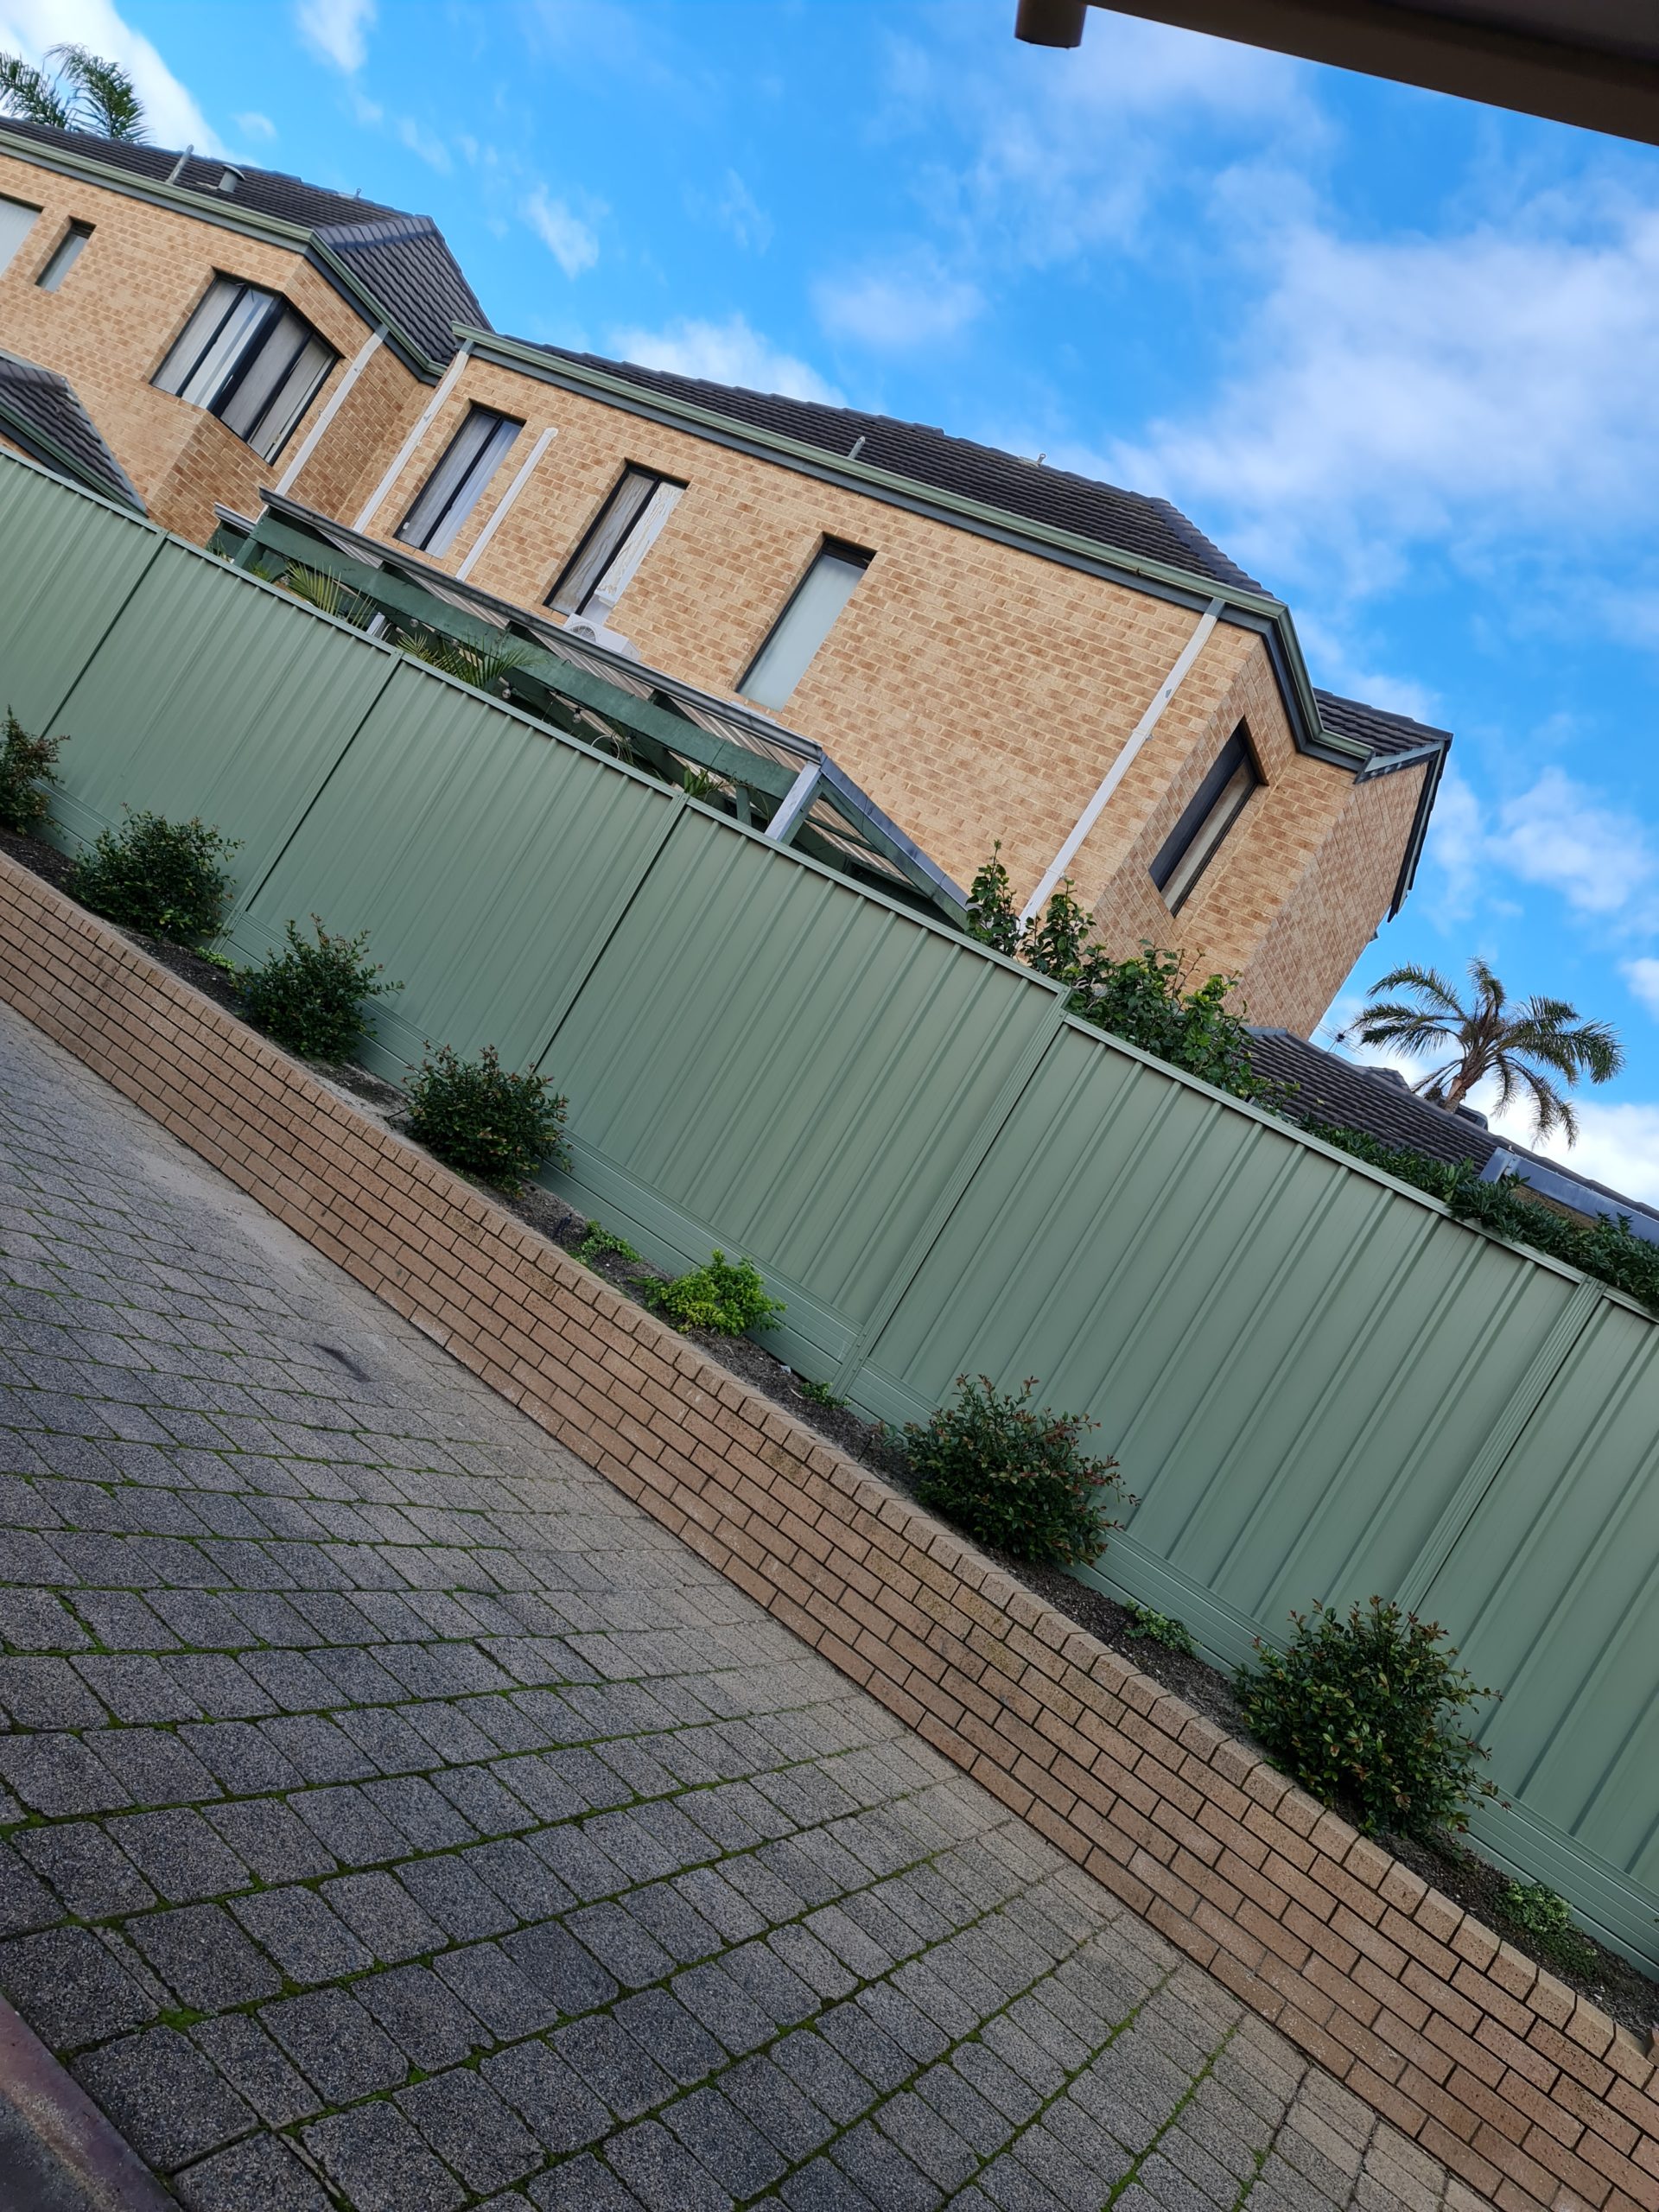 Fence installations in townhouses located in Perth, providing a practical and stylish solution for defining property boundaries and enhancing security and privacy. Depending on the specific needs and preferences of the property owner, a range of fence types can be installed, including Colorbond steel, timber, aluminum slat, glass pool, garrison, and tubular fencing. With a focus on safety, durability, and aesthetics, the fence installation team ensures that the fence is customized to suit the unique requirements of each townhouse, enhancing its value and functionality.